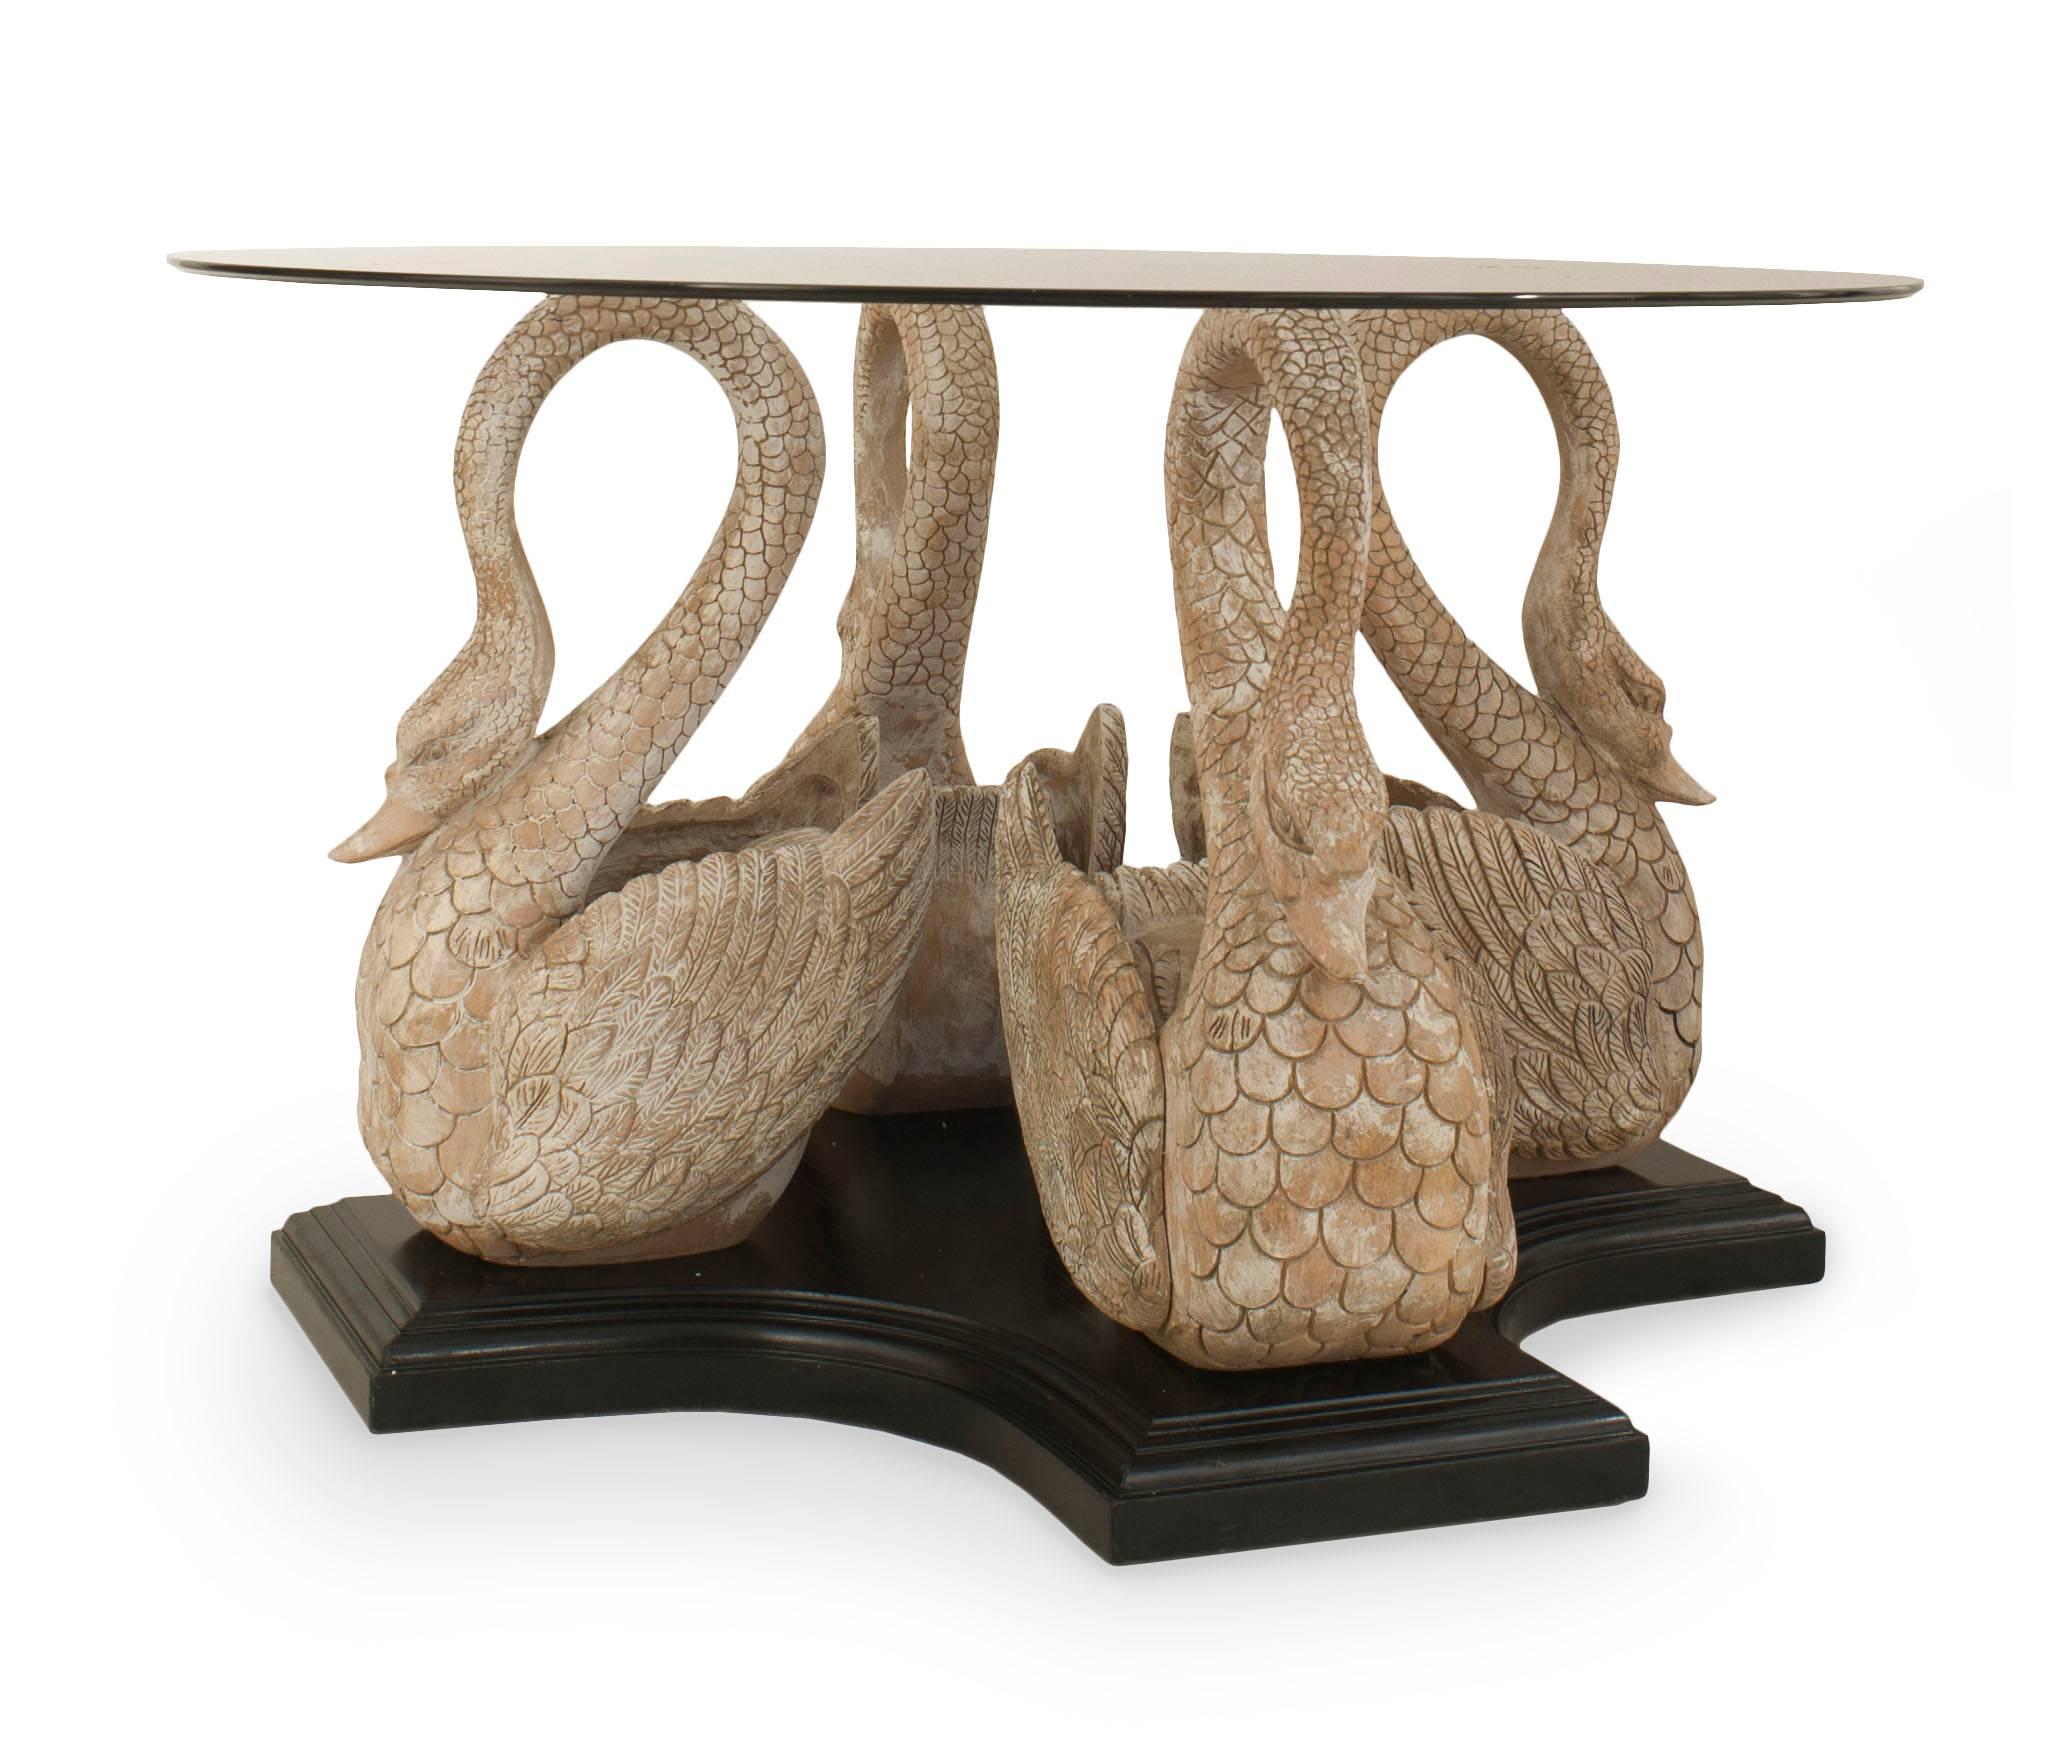 English Country style (19/20th Century) center table with 4 carved and bleached swans resting on an ebonized base supporting a round glass top.
 